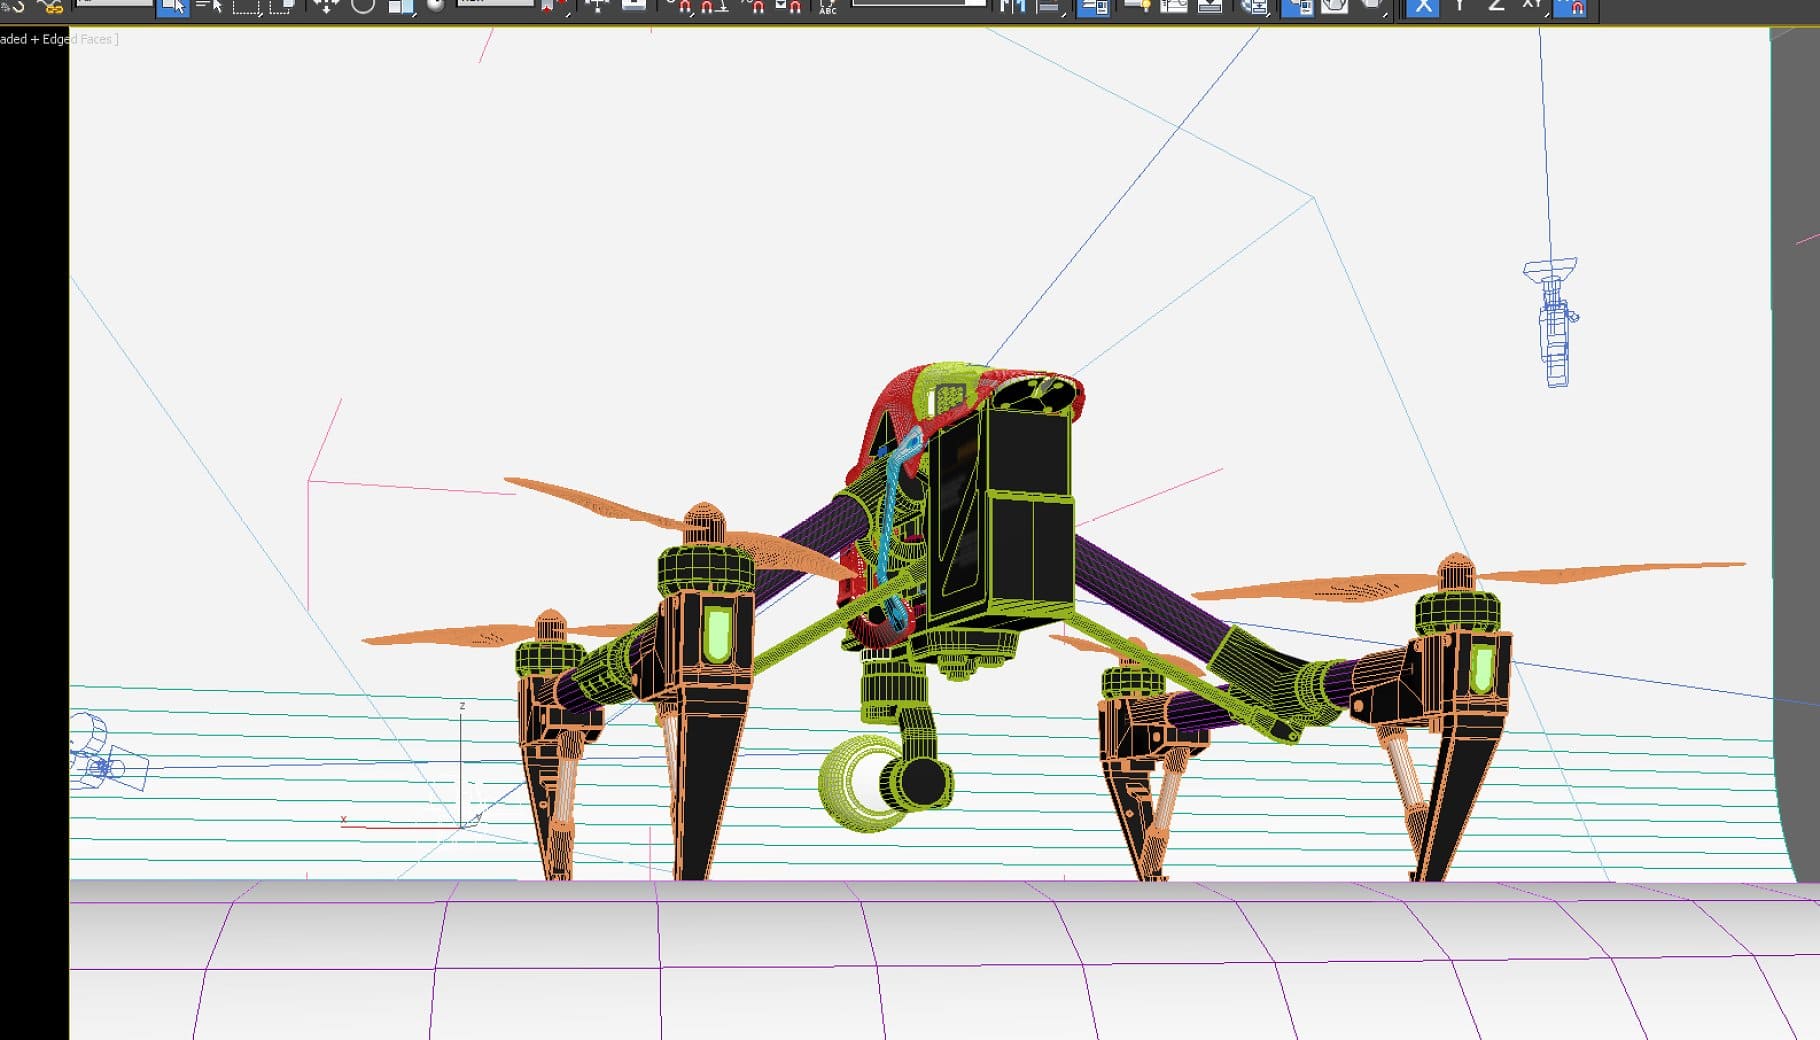 3D model of a quadcopter, the details of which are painted in different colors.